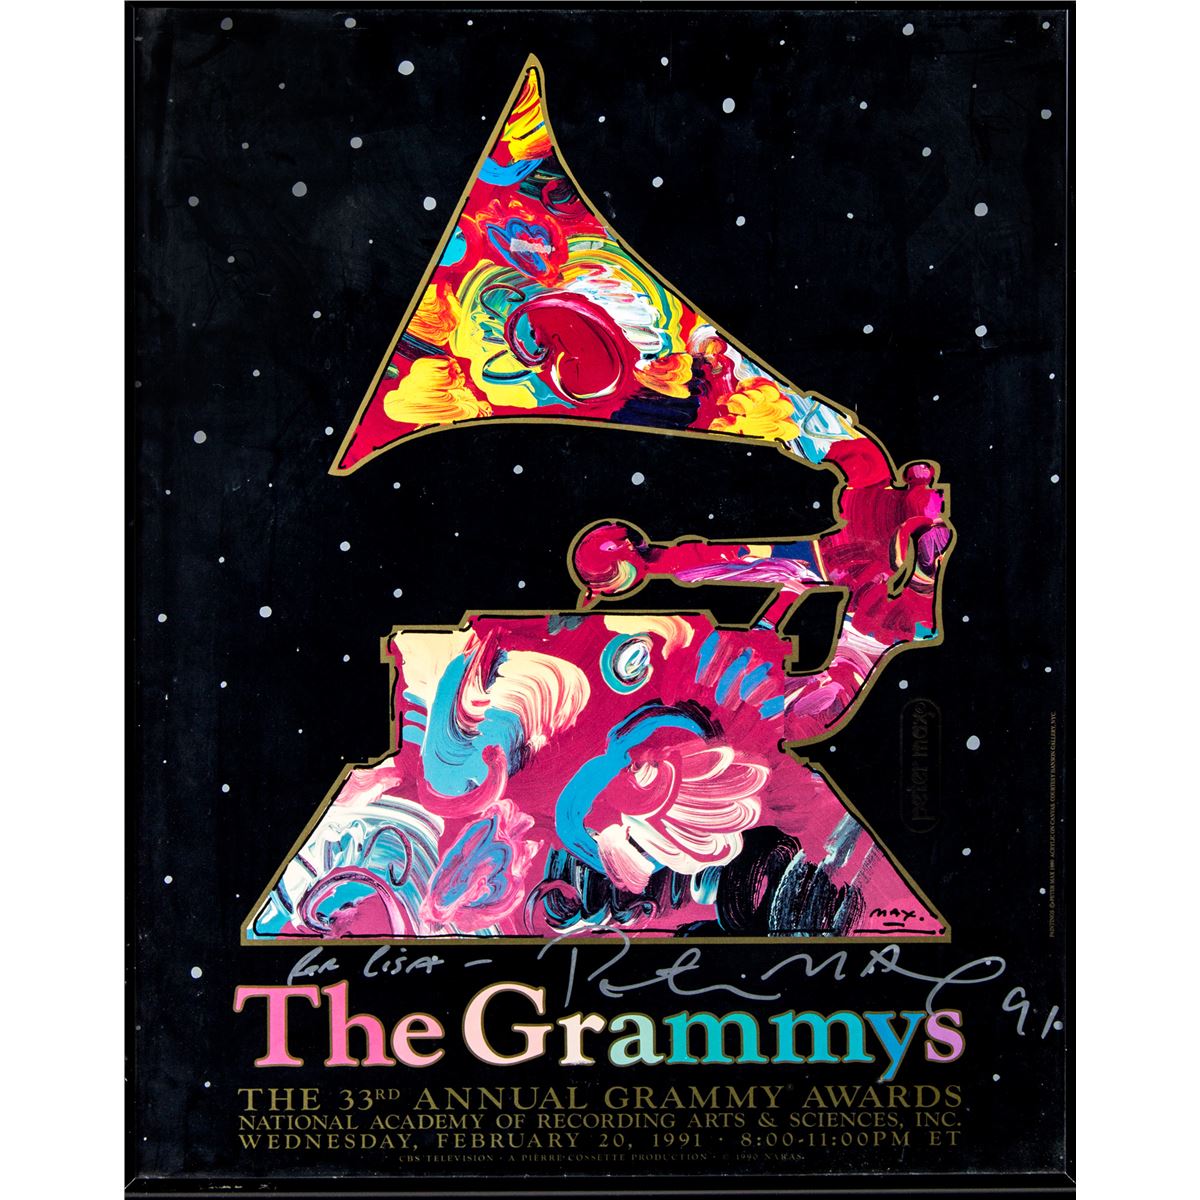 The 33rd Annual Grammy Awards